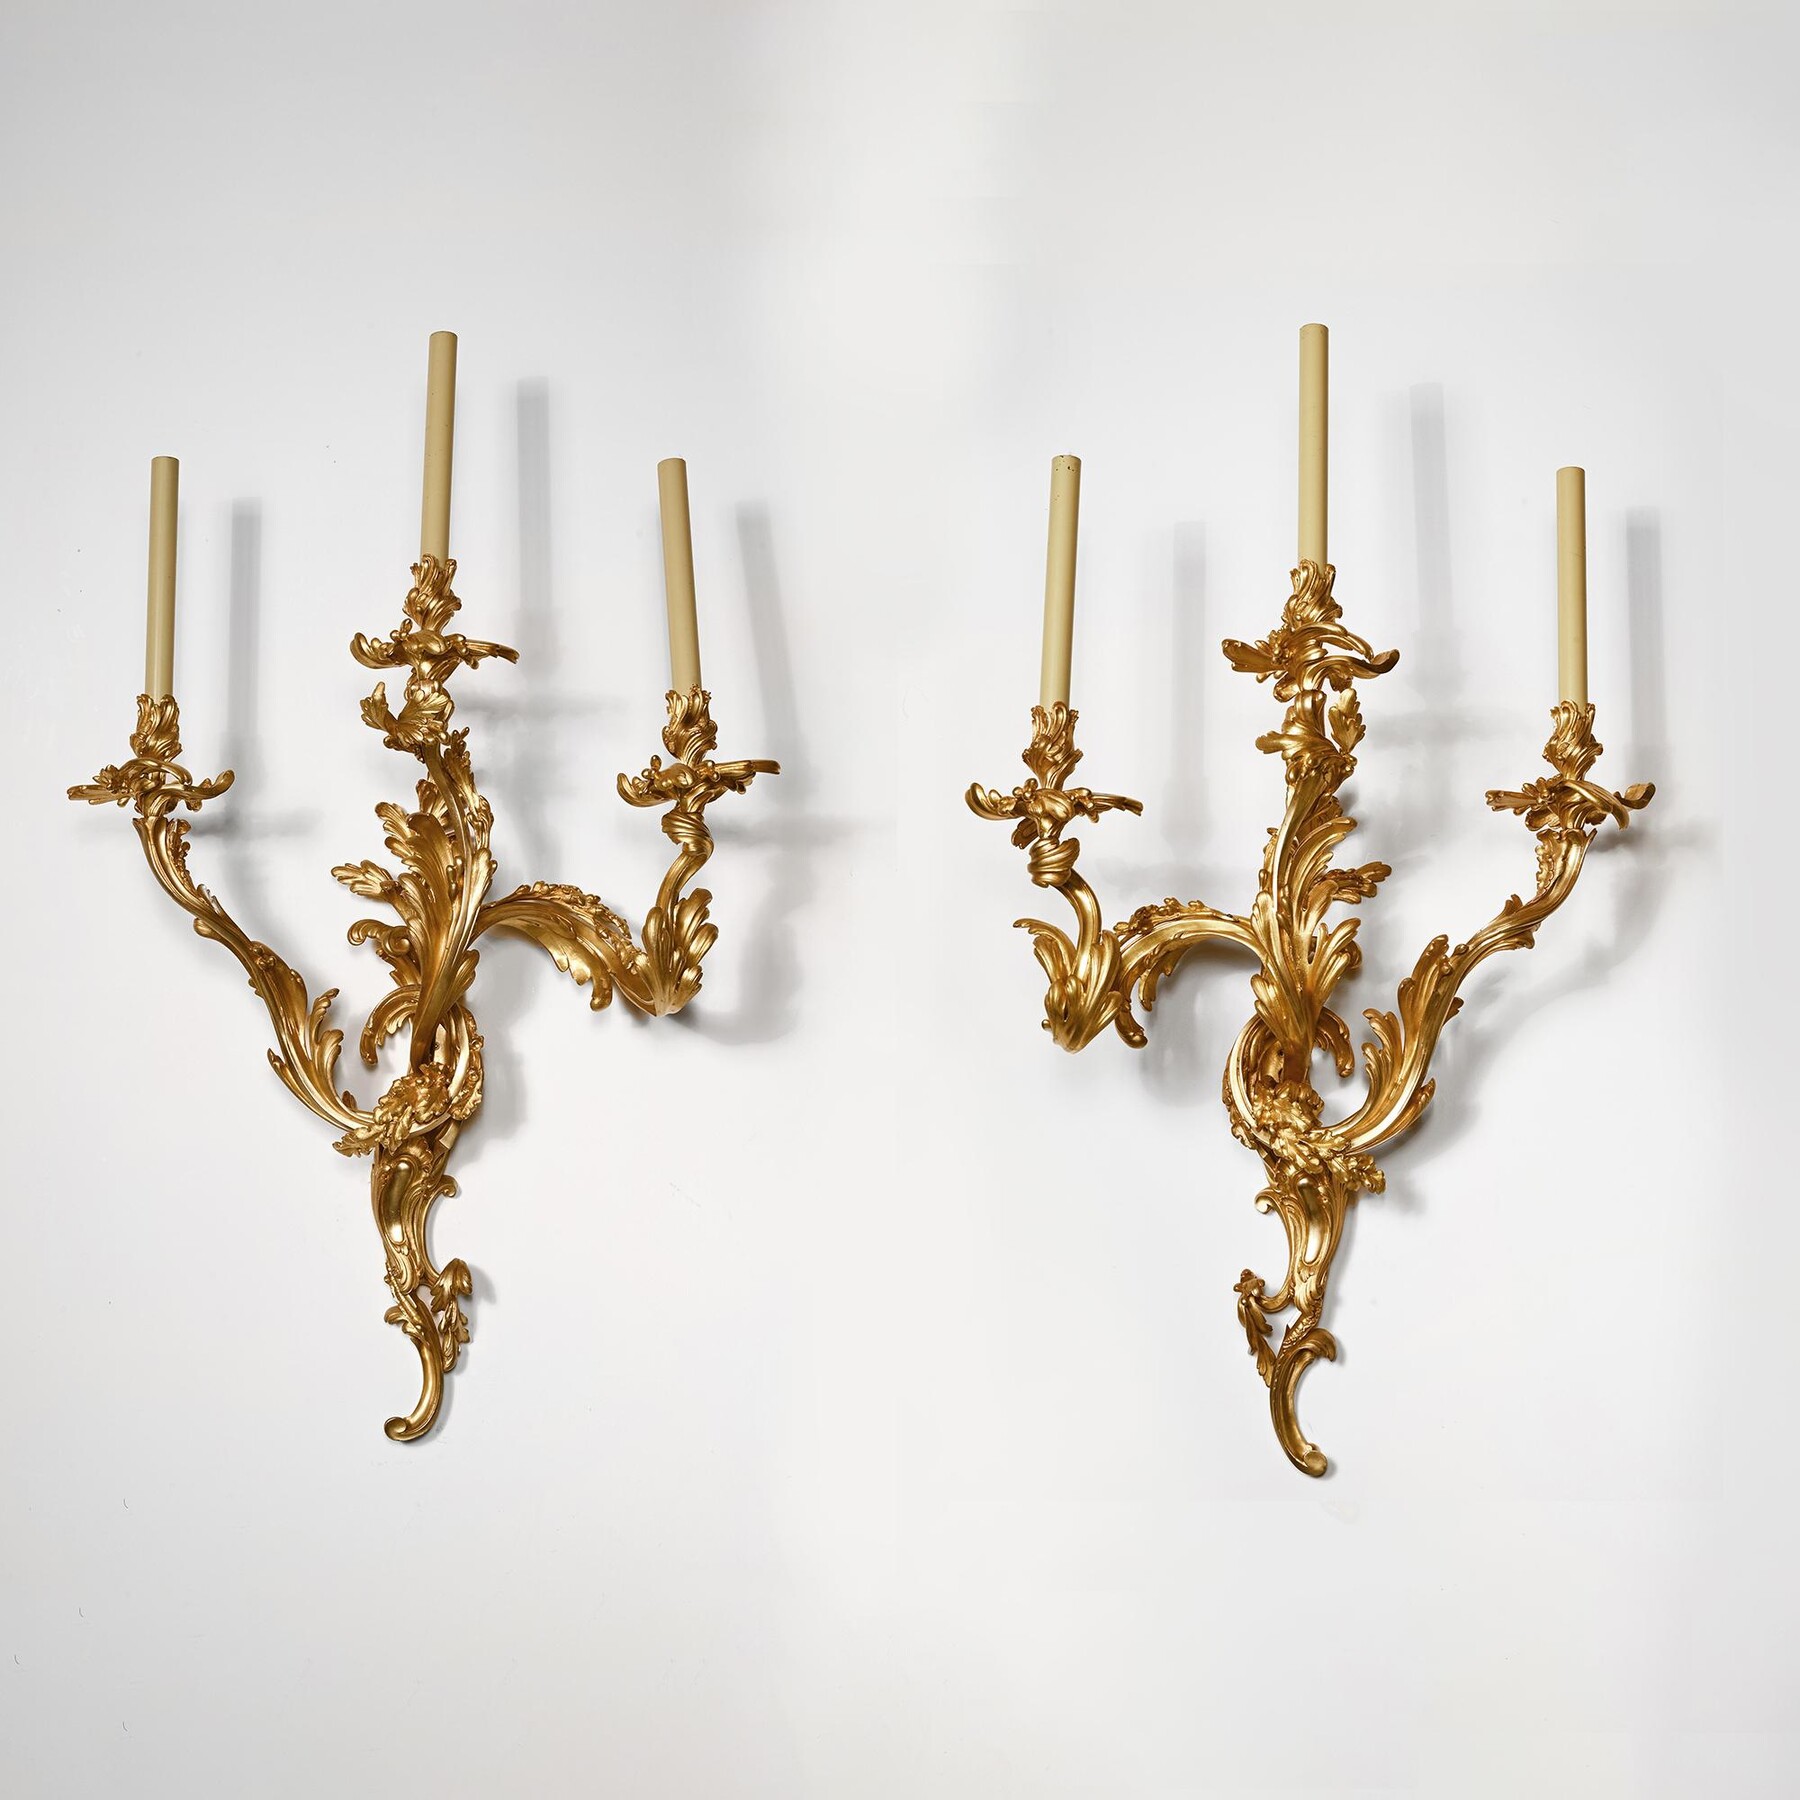 Pair of Large 19th Century French Three Branch Ormolu Wall Lights or Appliqués